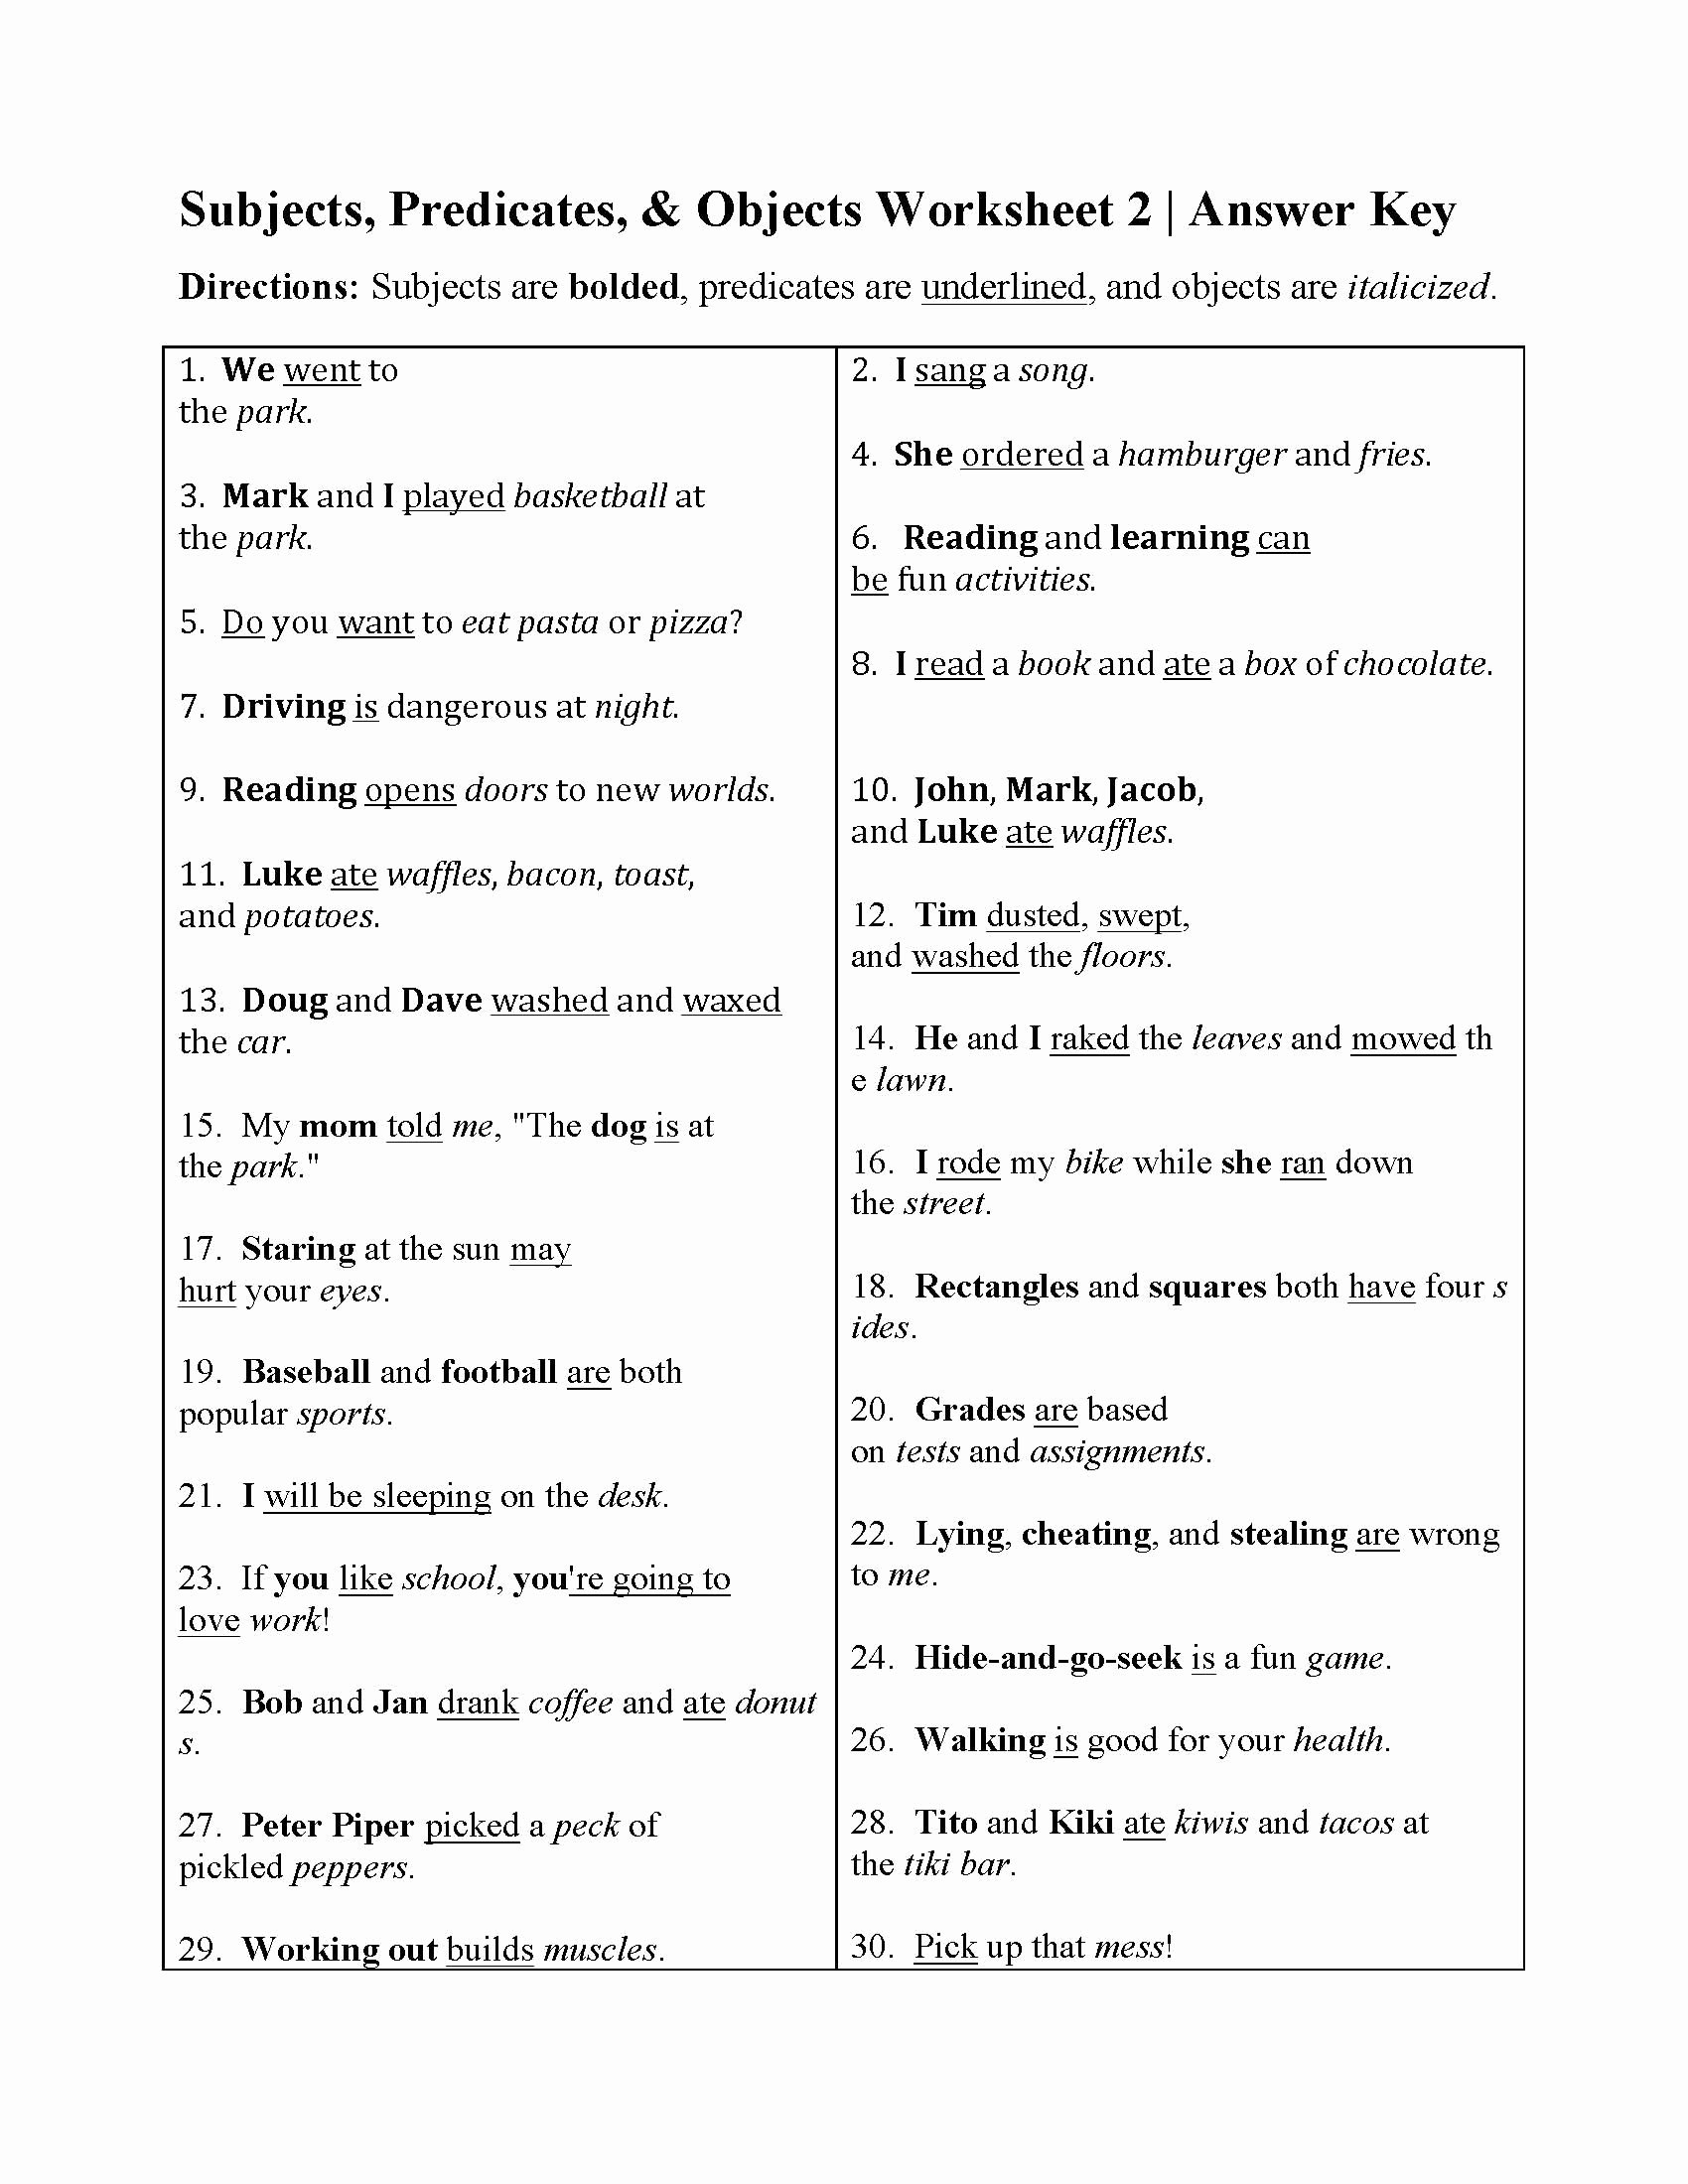 Subjects and Predicates Worksheet New Subjects Predicates and Objects Worksheet 2